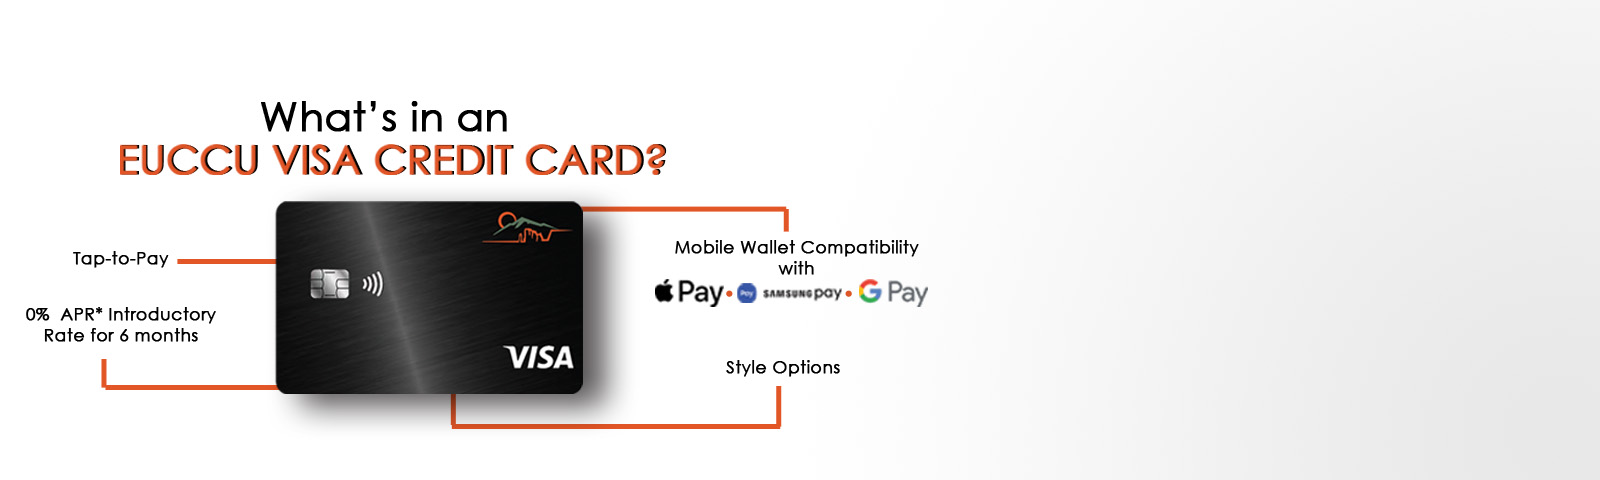 What's in an EUCCU VISA Credit Card? Tap-to-Pay, 0% APR* Introductory Rate for 6 months, Mobile Wallet Compatibility with Apple Pay, Samsung Pay, and Google Pay and Style Options.